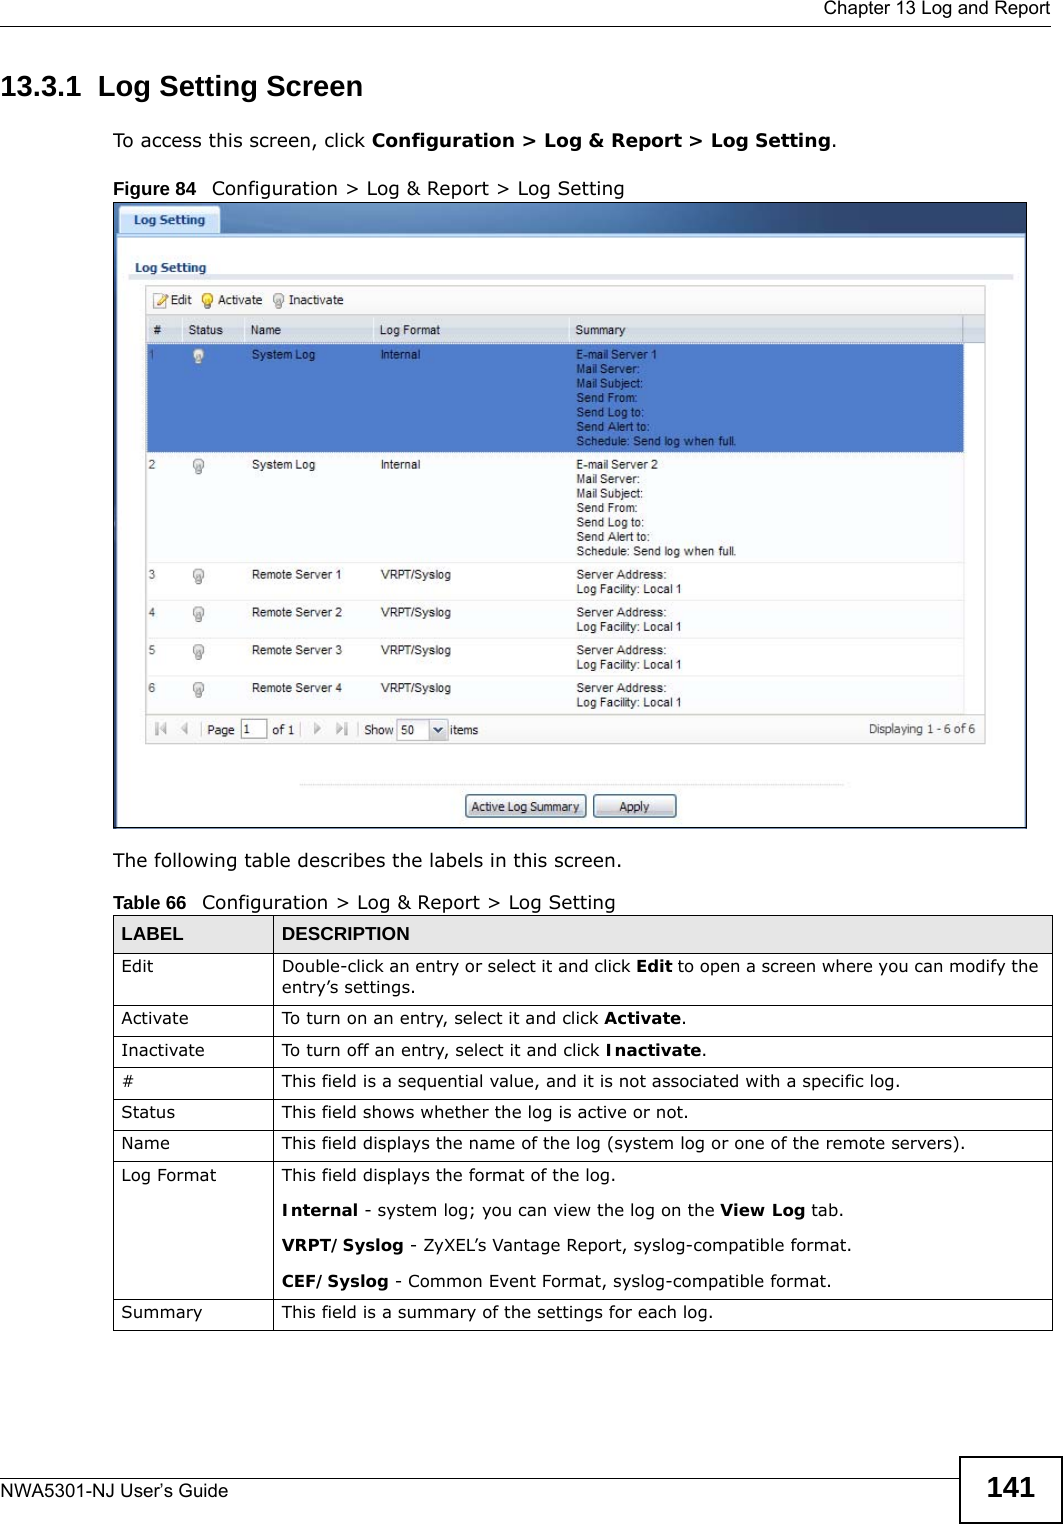  Chapter 13 Log and ReportNWA5301-NJ User’s Guide 14113.3.1  Log Setting ScreenTo access this screen, click Configuration &gt; Log &amp; Report &gt; Log Setting.Figure 84   Configuration &gt; Log &amp; Report &gt; Log SettingThe following table describes the labels in this screen.  Table 66   Configuration &gt; Log &amp; Report &gt; Log SettingLABEL DESCRIPTIONEdit Double-click an entry or select it and click Edit to open a screen where you can modify the entry’s settings. Activate To turn on an entry, select it and click Activate.Inactivate To turn off an entry, select it and click Inactivate.# This field is a sequential value, and it is not associated with a specific log.Status This field shows whether the log is active or not.Name This field displays the name of the log (system log or one of the remote servers).Log Format This field displays the format of the log. Internal - system log; you can view the log on the View Log tab.VRPT/Syslog - ZyXEL’s Vantage Report, syslog-compatible format.CEF/Syslog - Common Event Format, syslog-compatible format.Summary This field is a summary of the settings for each log.